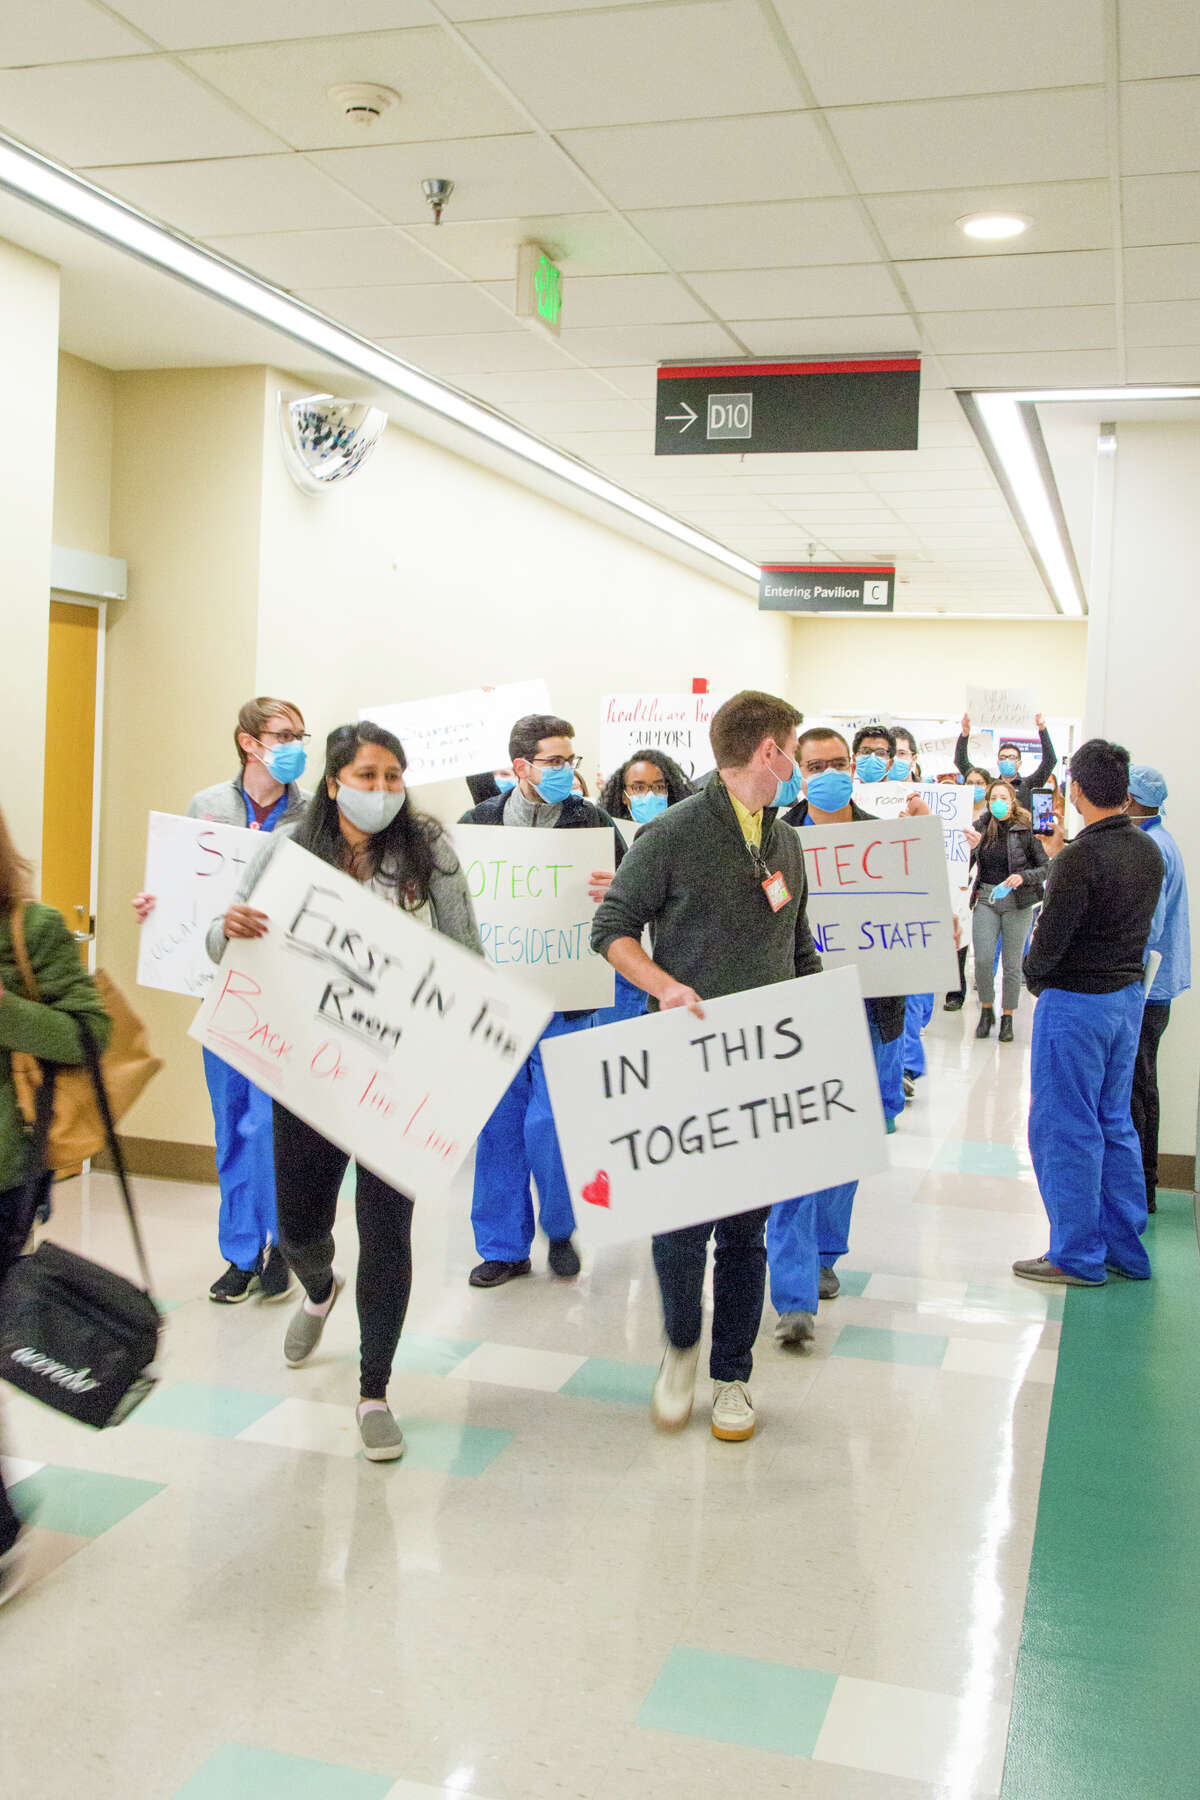 Residents at Stanford Hospital protested Friday, December 18, 2020 against executives' decision to give vaccines to some administrators and doctors who are at home and not in contact with patients rather than workers at First line.